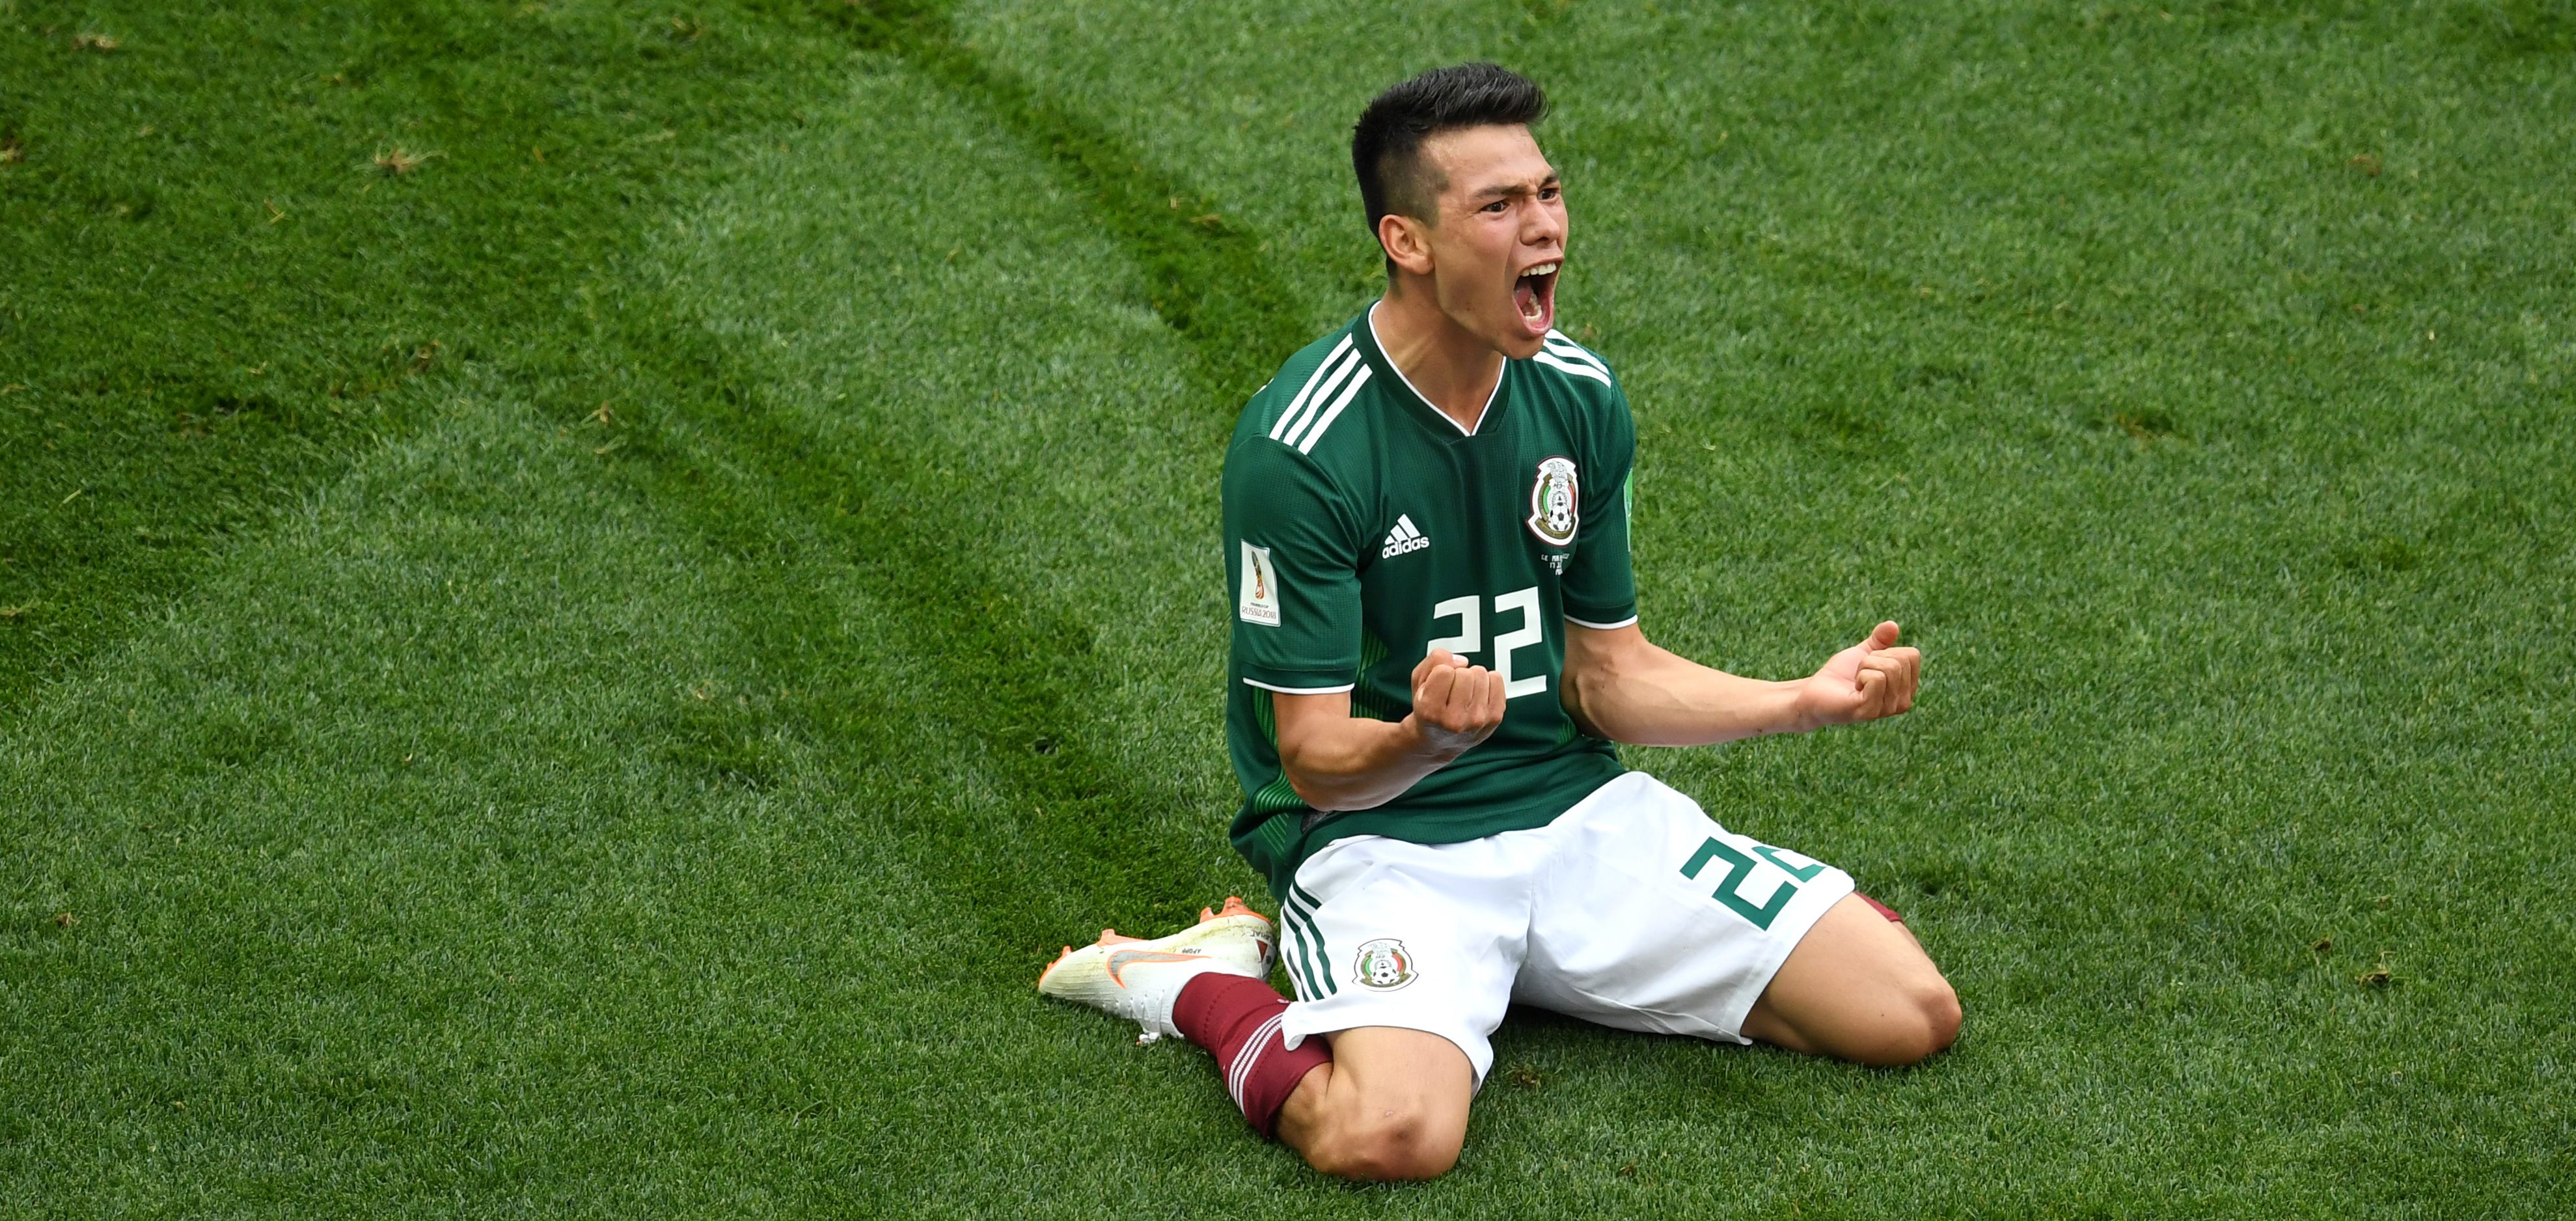 Hirving Lozano of Mexico celebrates by sliding on his knees after scoring his team's first goal during the 2018 FIFA World Cup Russia group F match between Germany and Mexico at Luzhniki Stadium on June 17, 2018 in Moscow, Russia.  (Matthias Hangst/Getty Images)